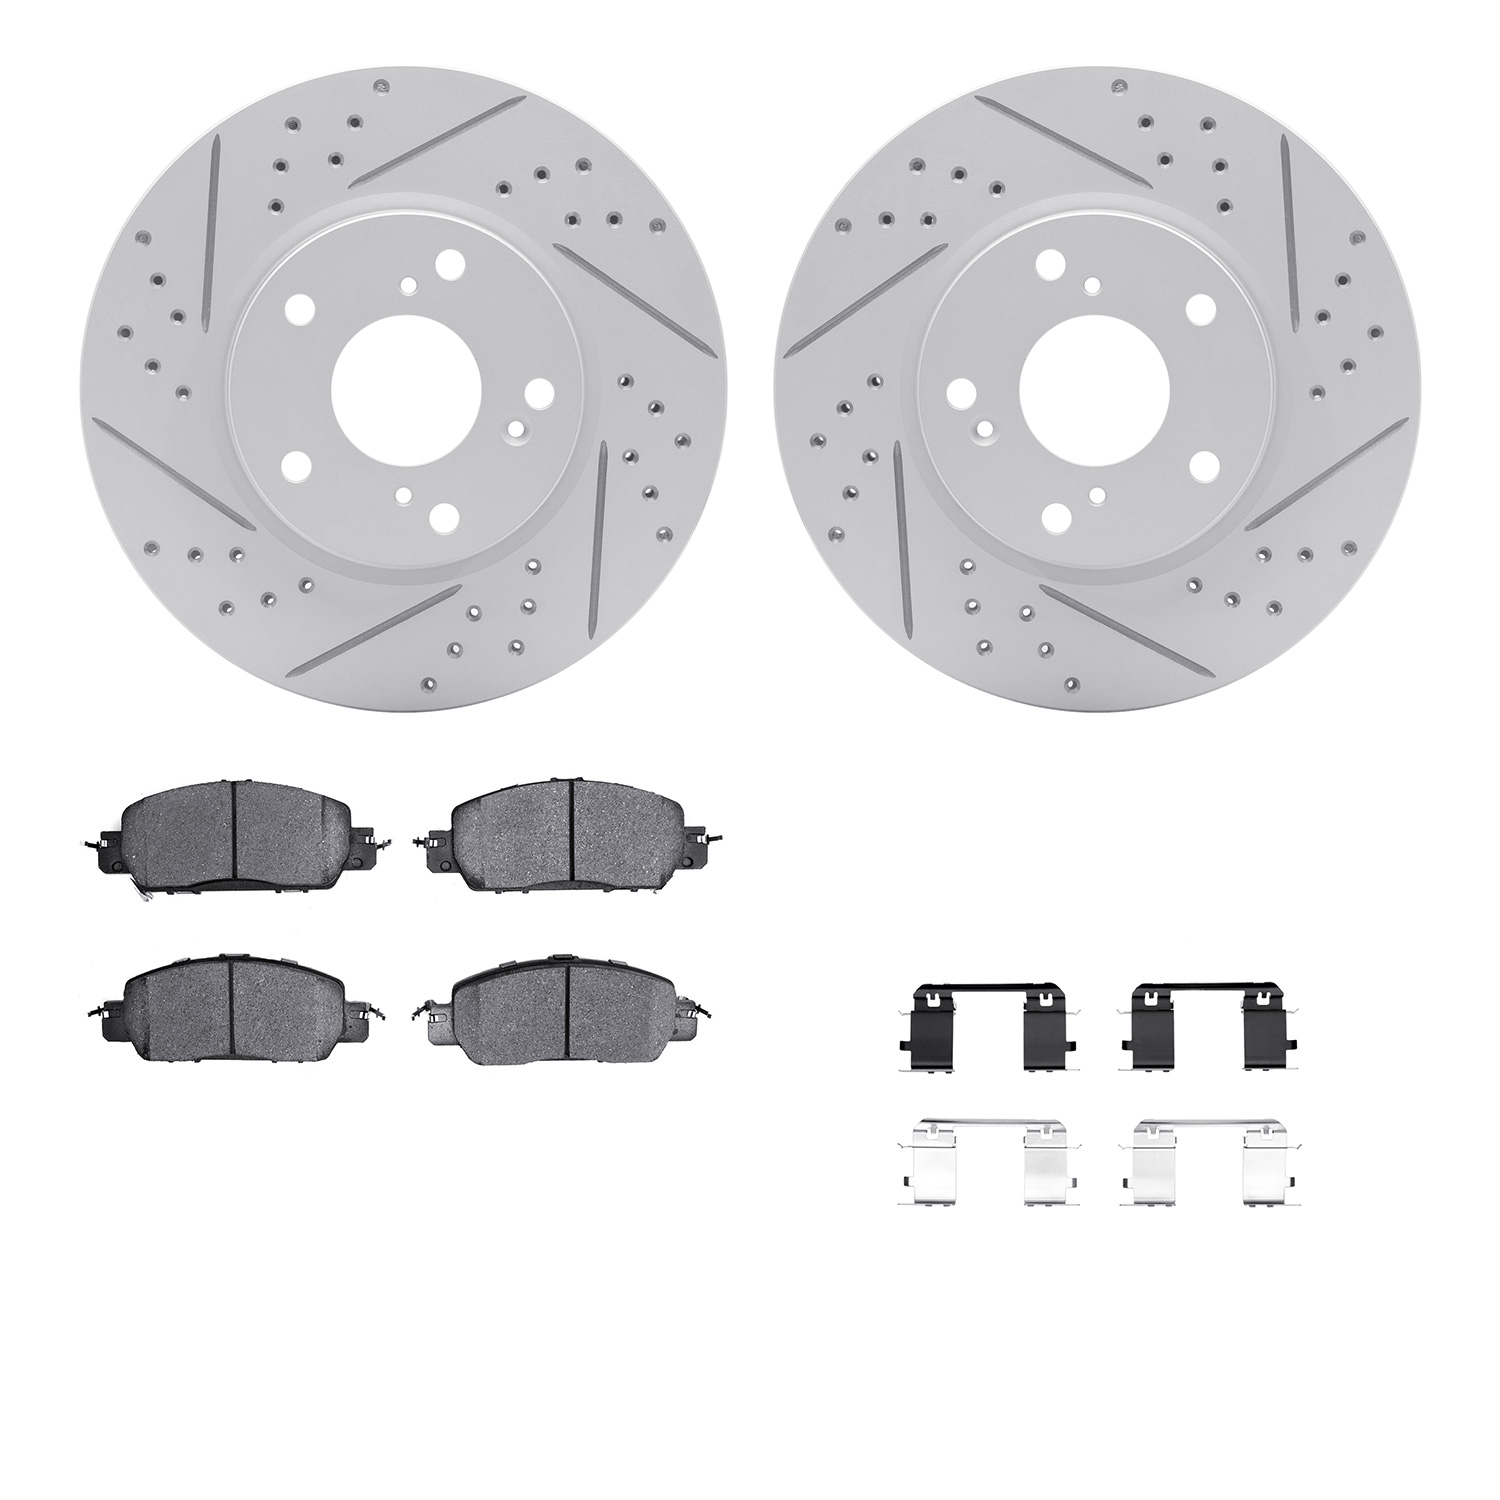 2512-59091 Geoperformance Drilled/Slotted Rotors w/5000 Advanced Brake Pads Kit & Hardware, 2016-2017 Acura/Honda, Position: Fro